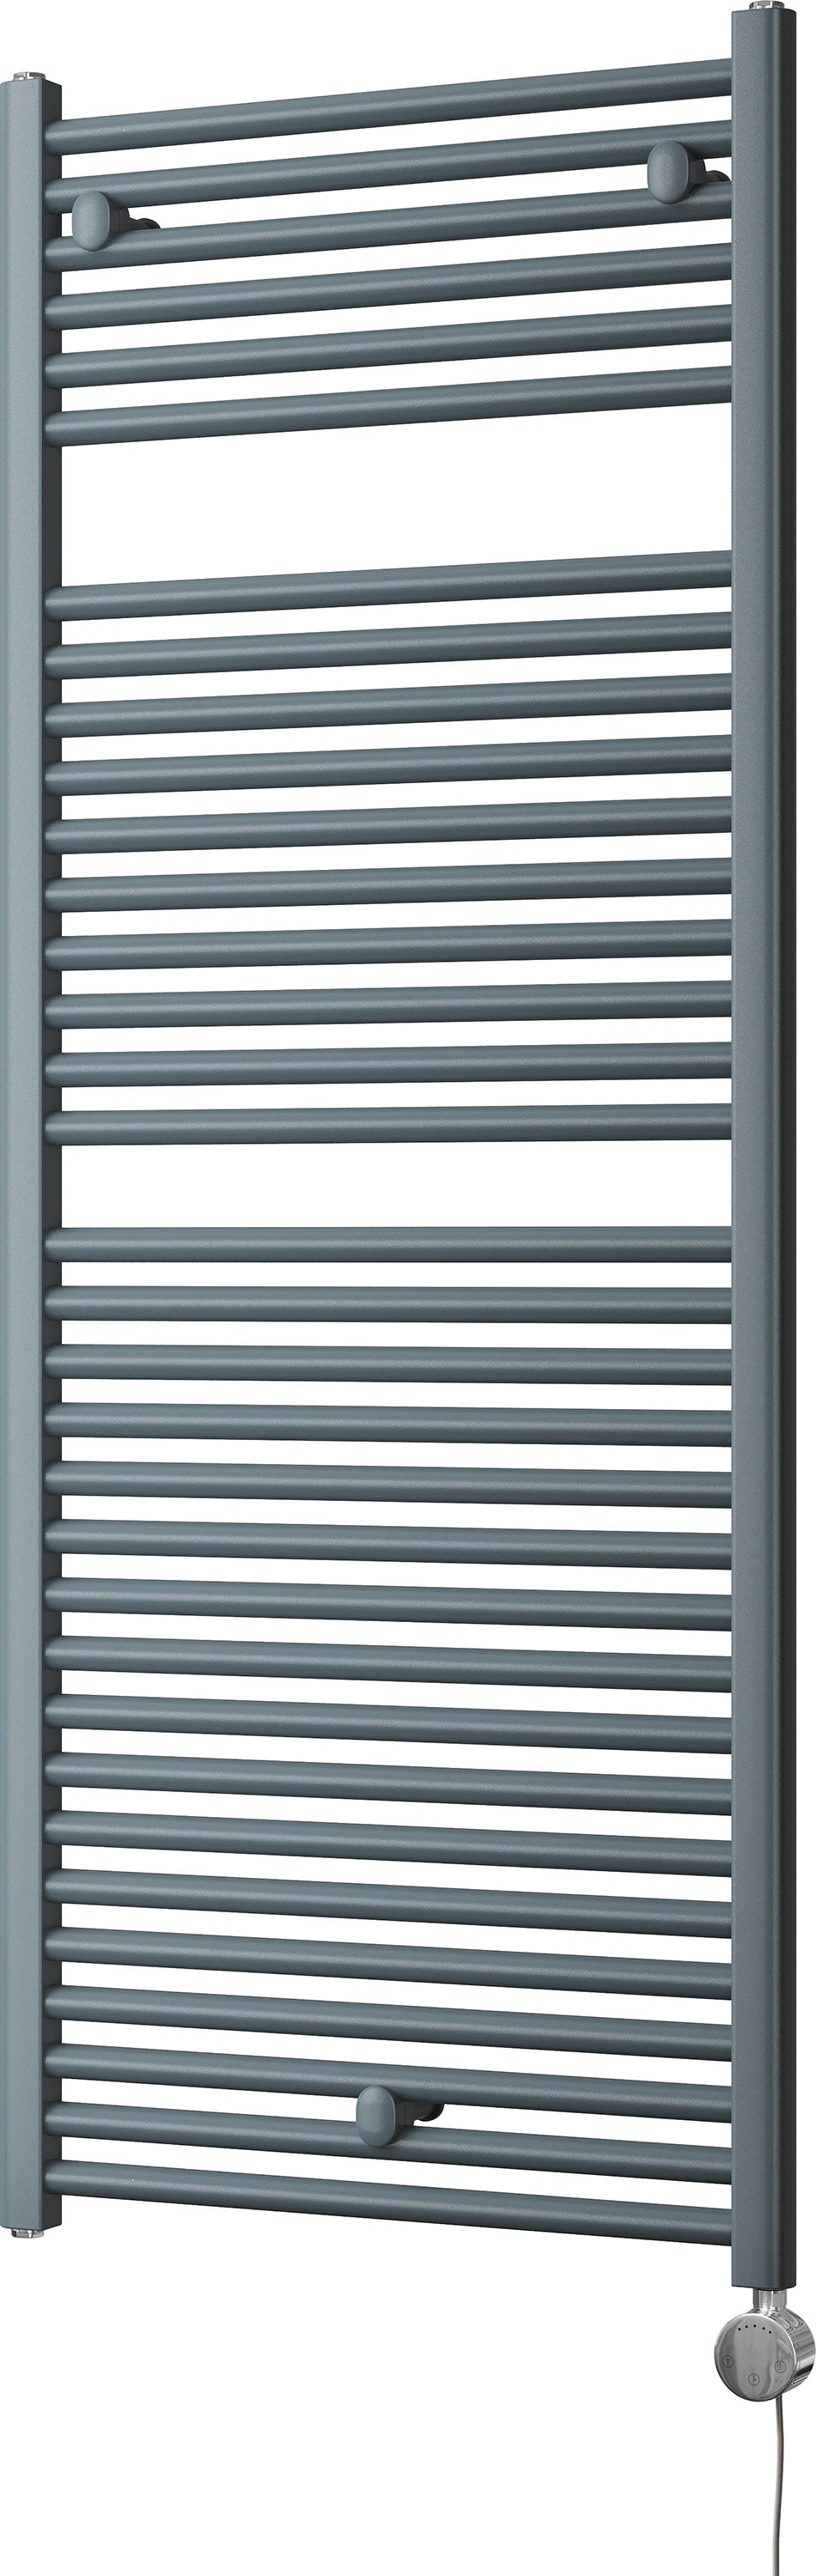 Roma - Anthracite Electric Towel Rail H1512mm x W600mm Straight 1000w Thermostatic